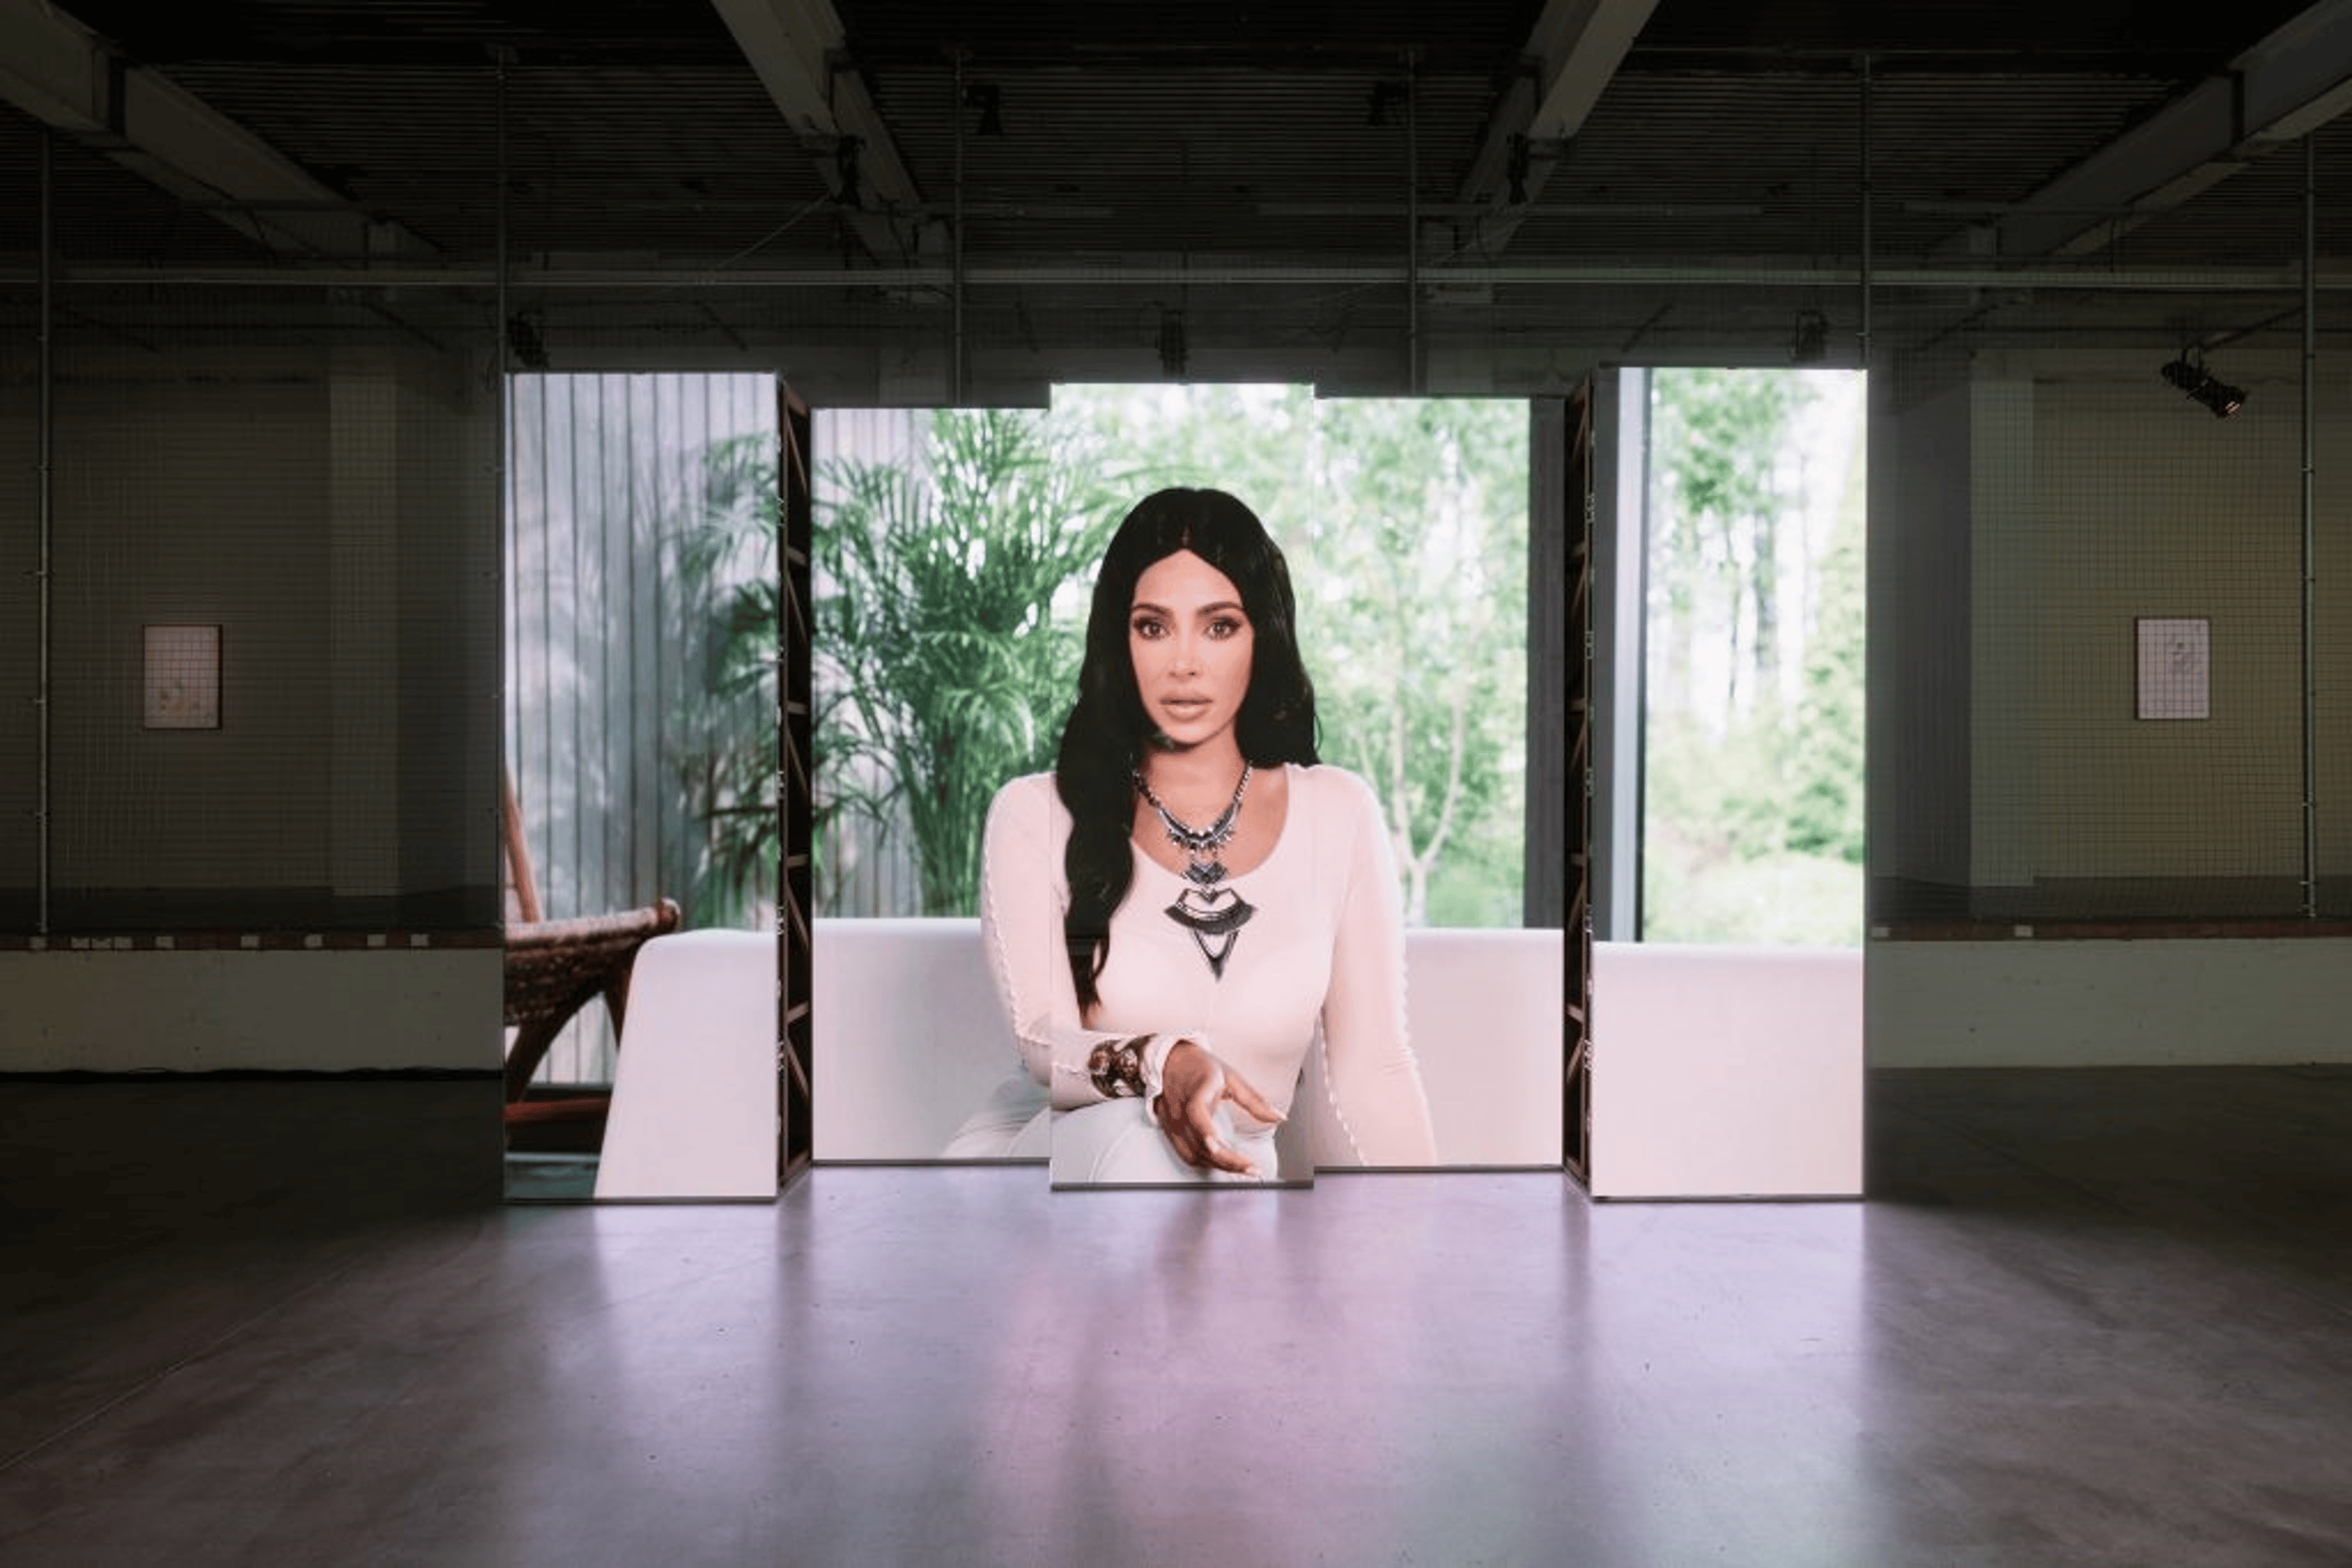 A video of Kim Kardashian in a white dress projected into giant cube-shaped mirrors.